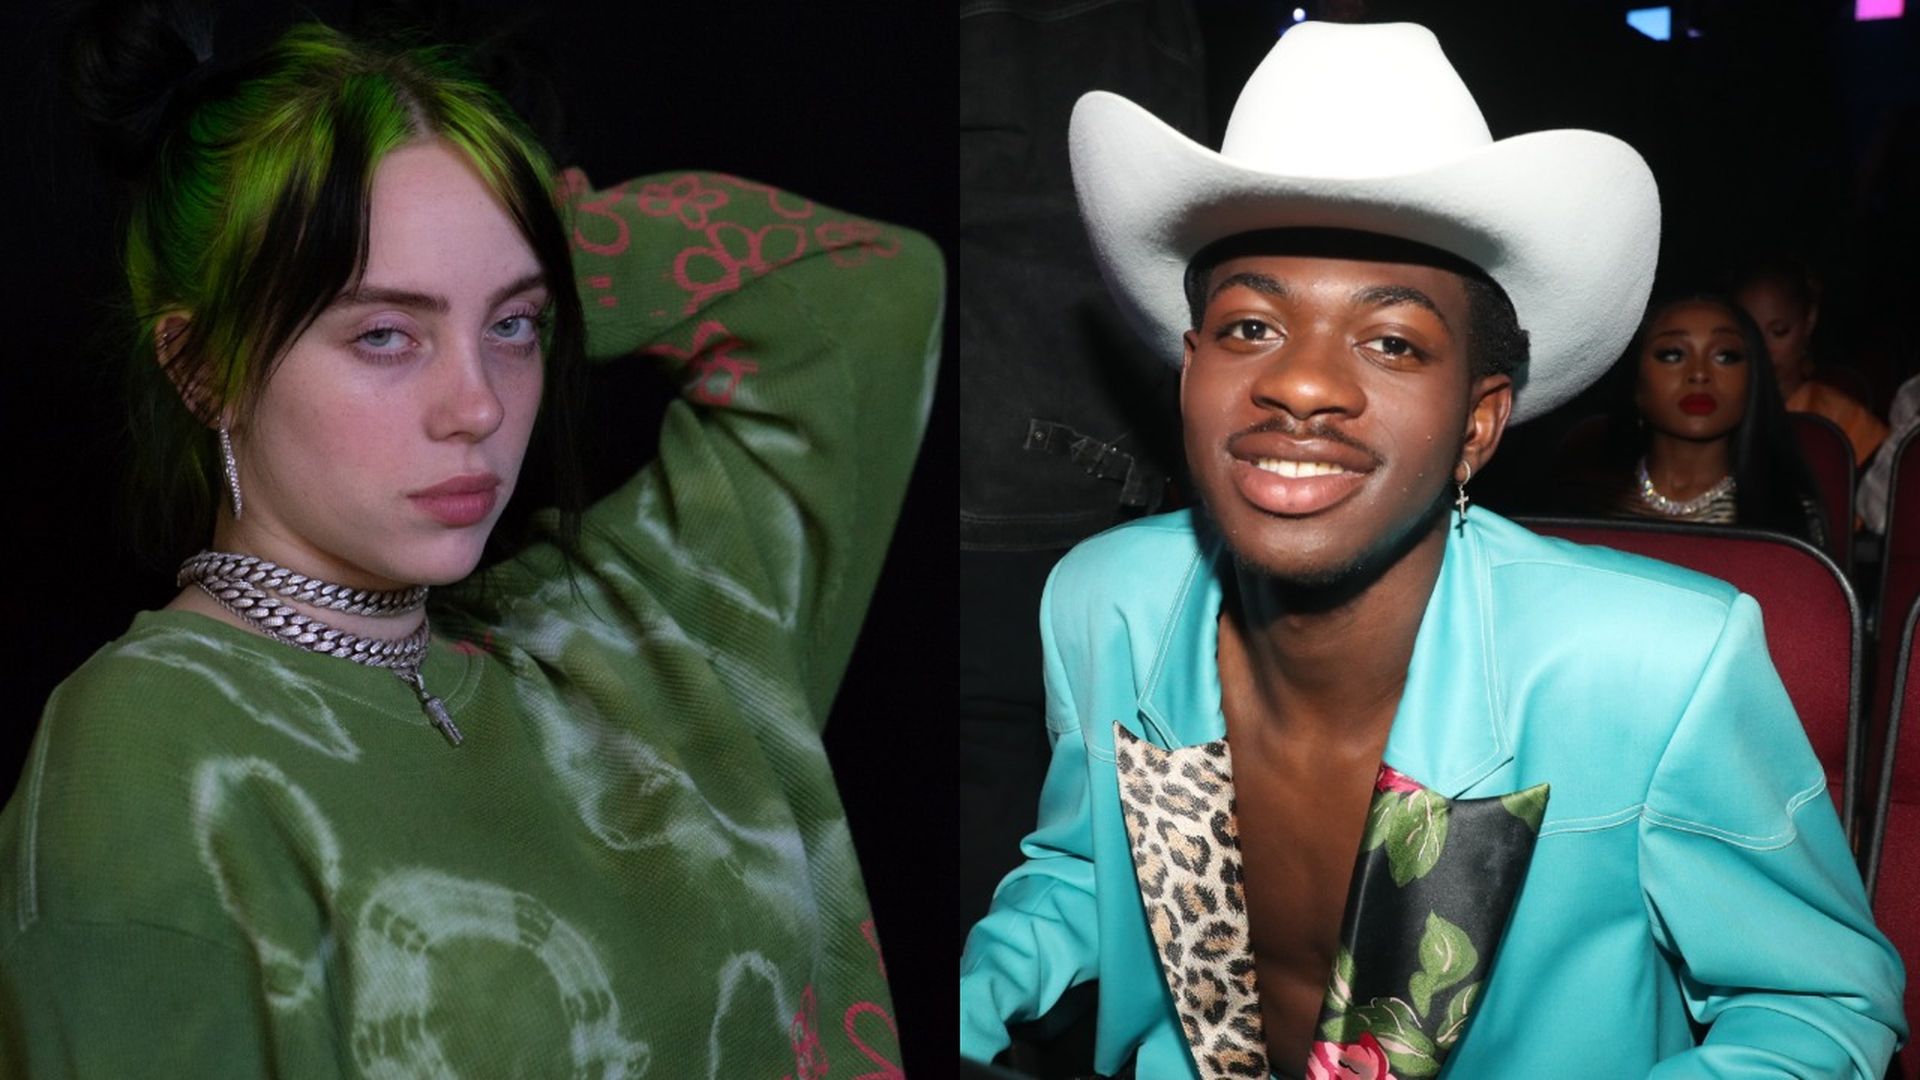 Billie Eilish And Lil Nas X Prove Generation Z Knows How To Own